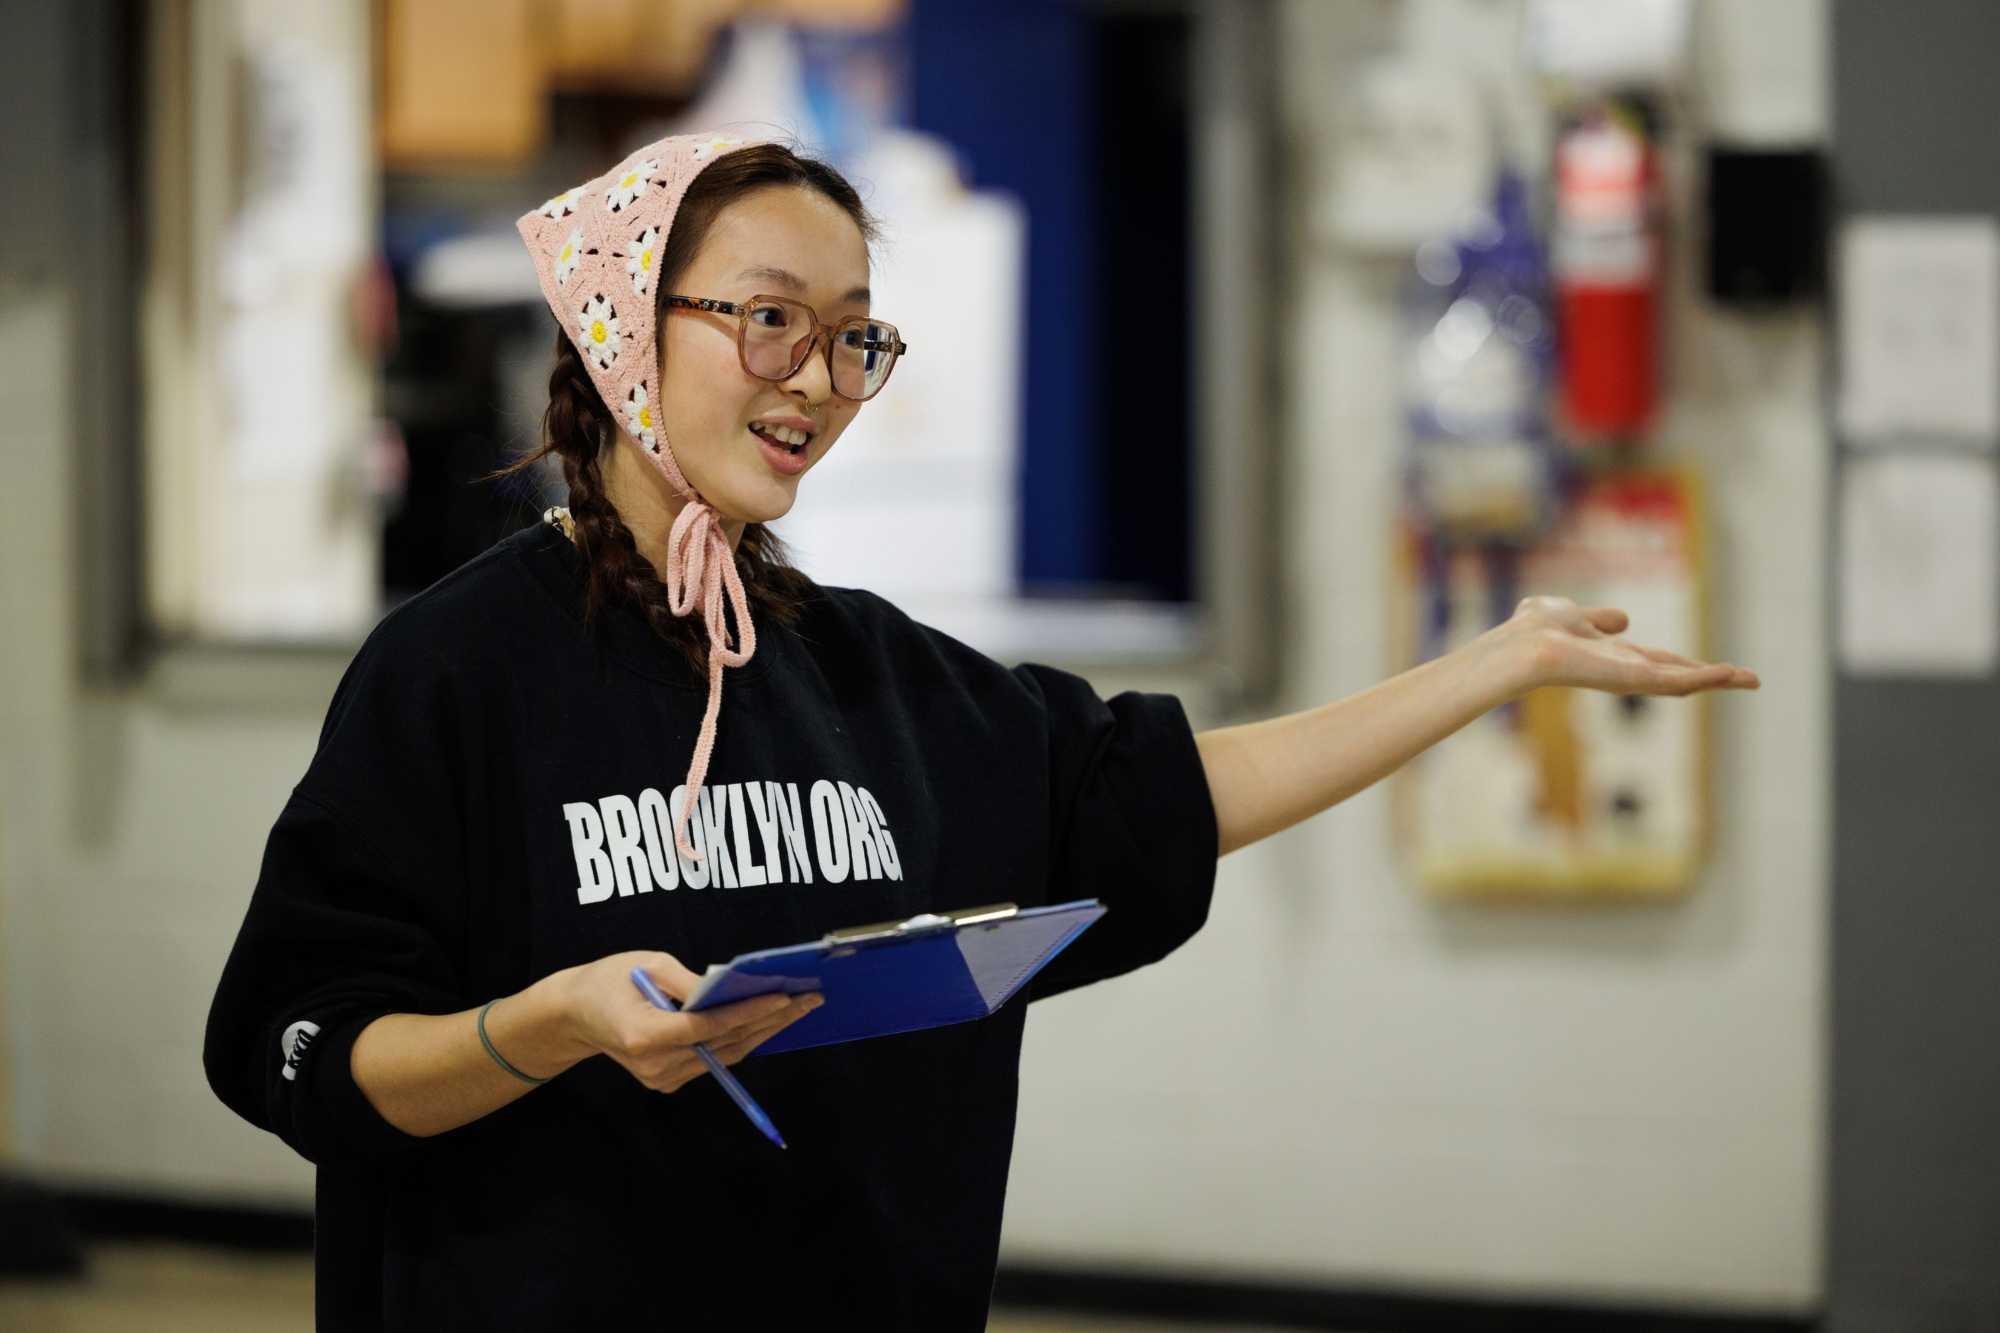 A woman wearing glasses and a pink headscarf speaks and gestures in a workshop setting while holding a clipboard.